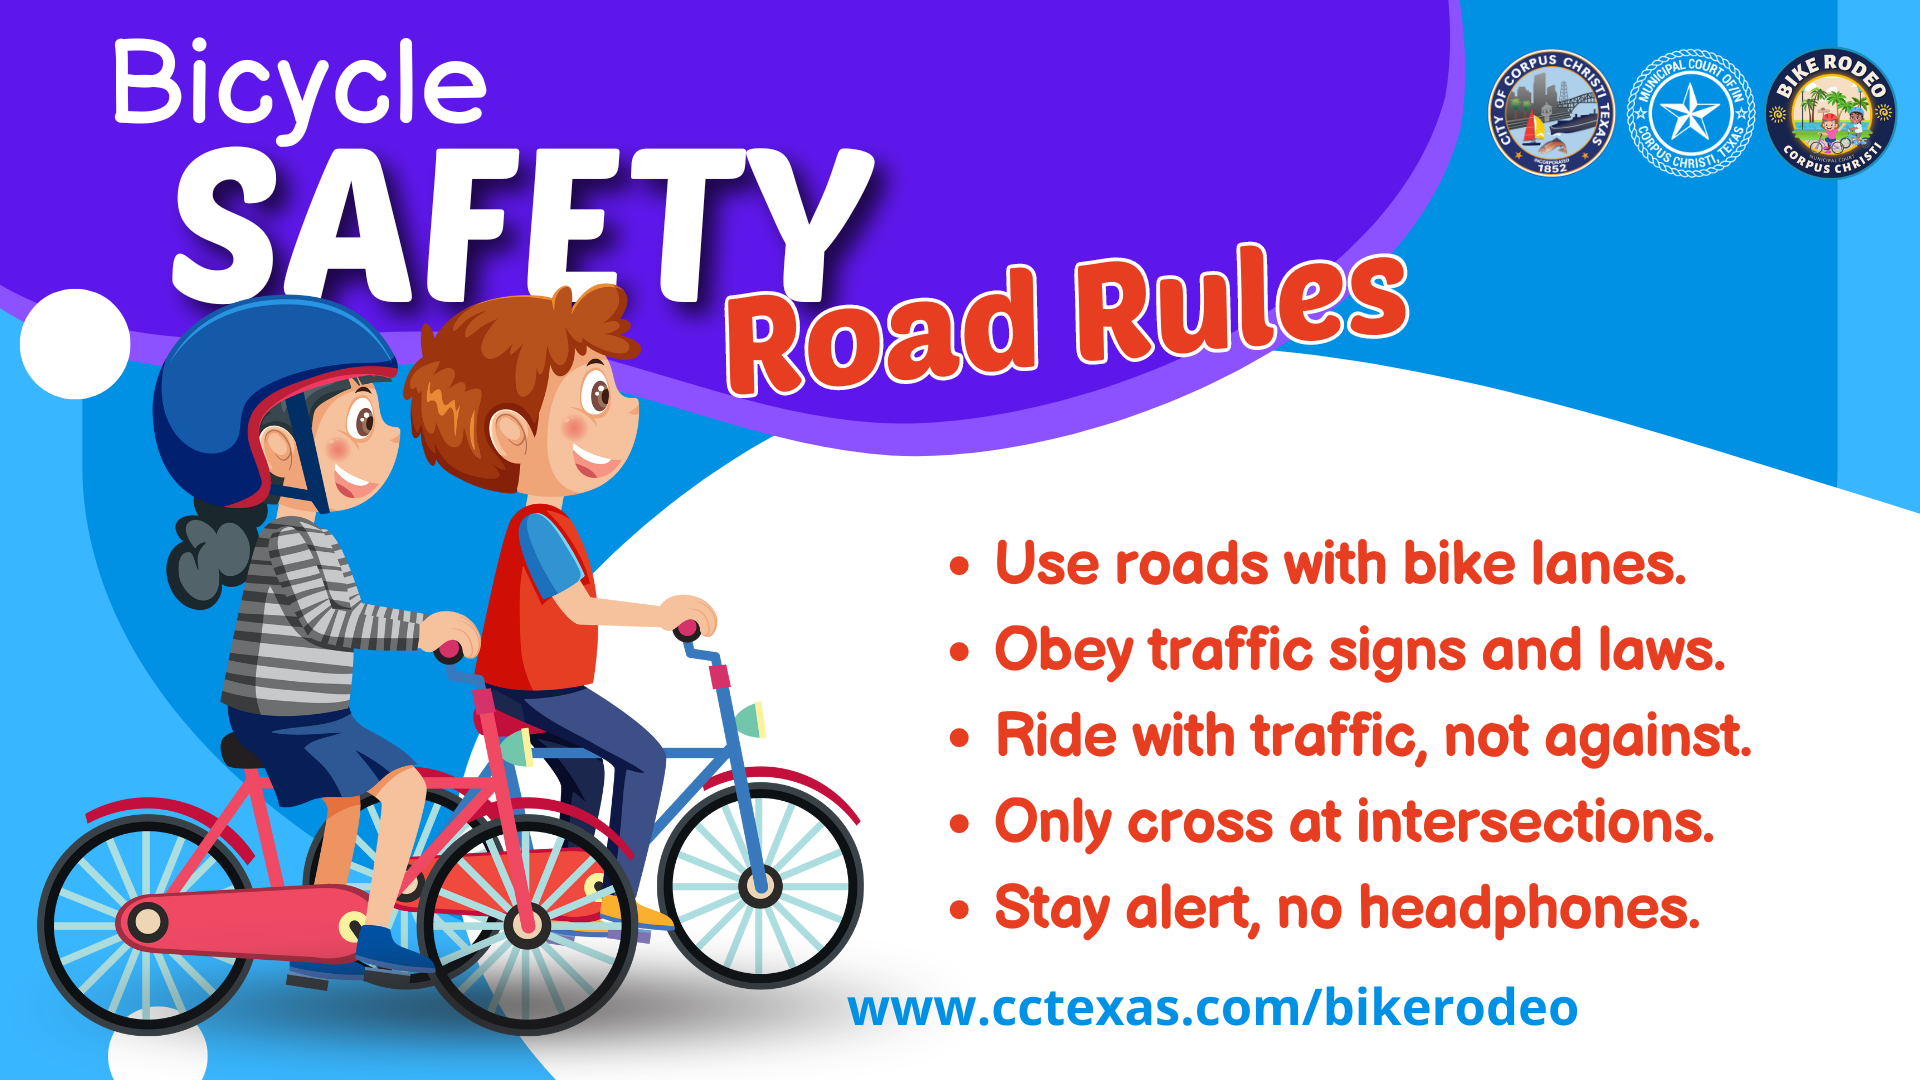 Bicycle Safety Road Rules